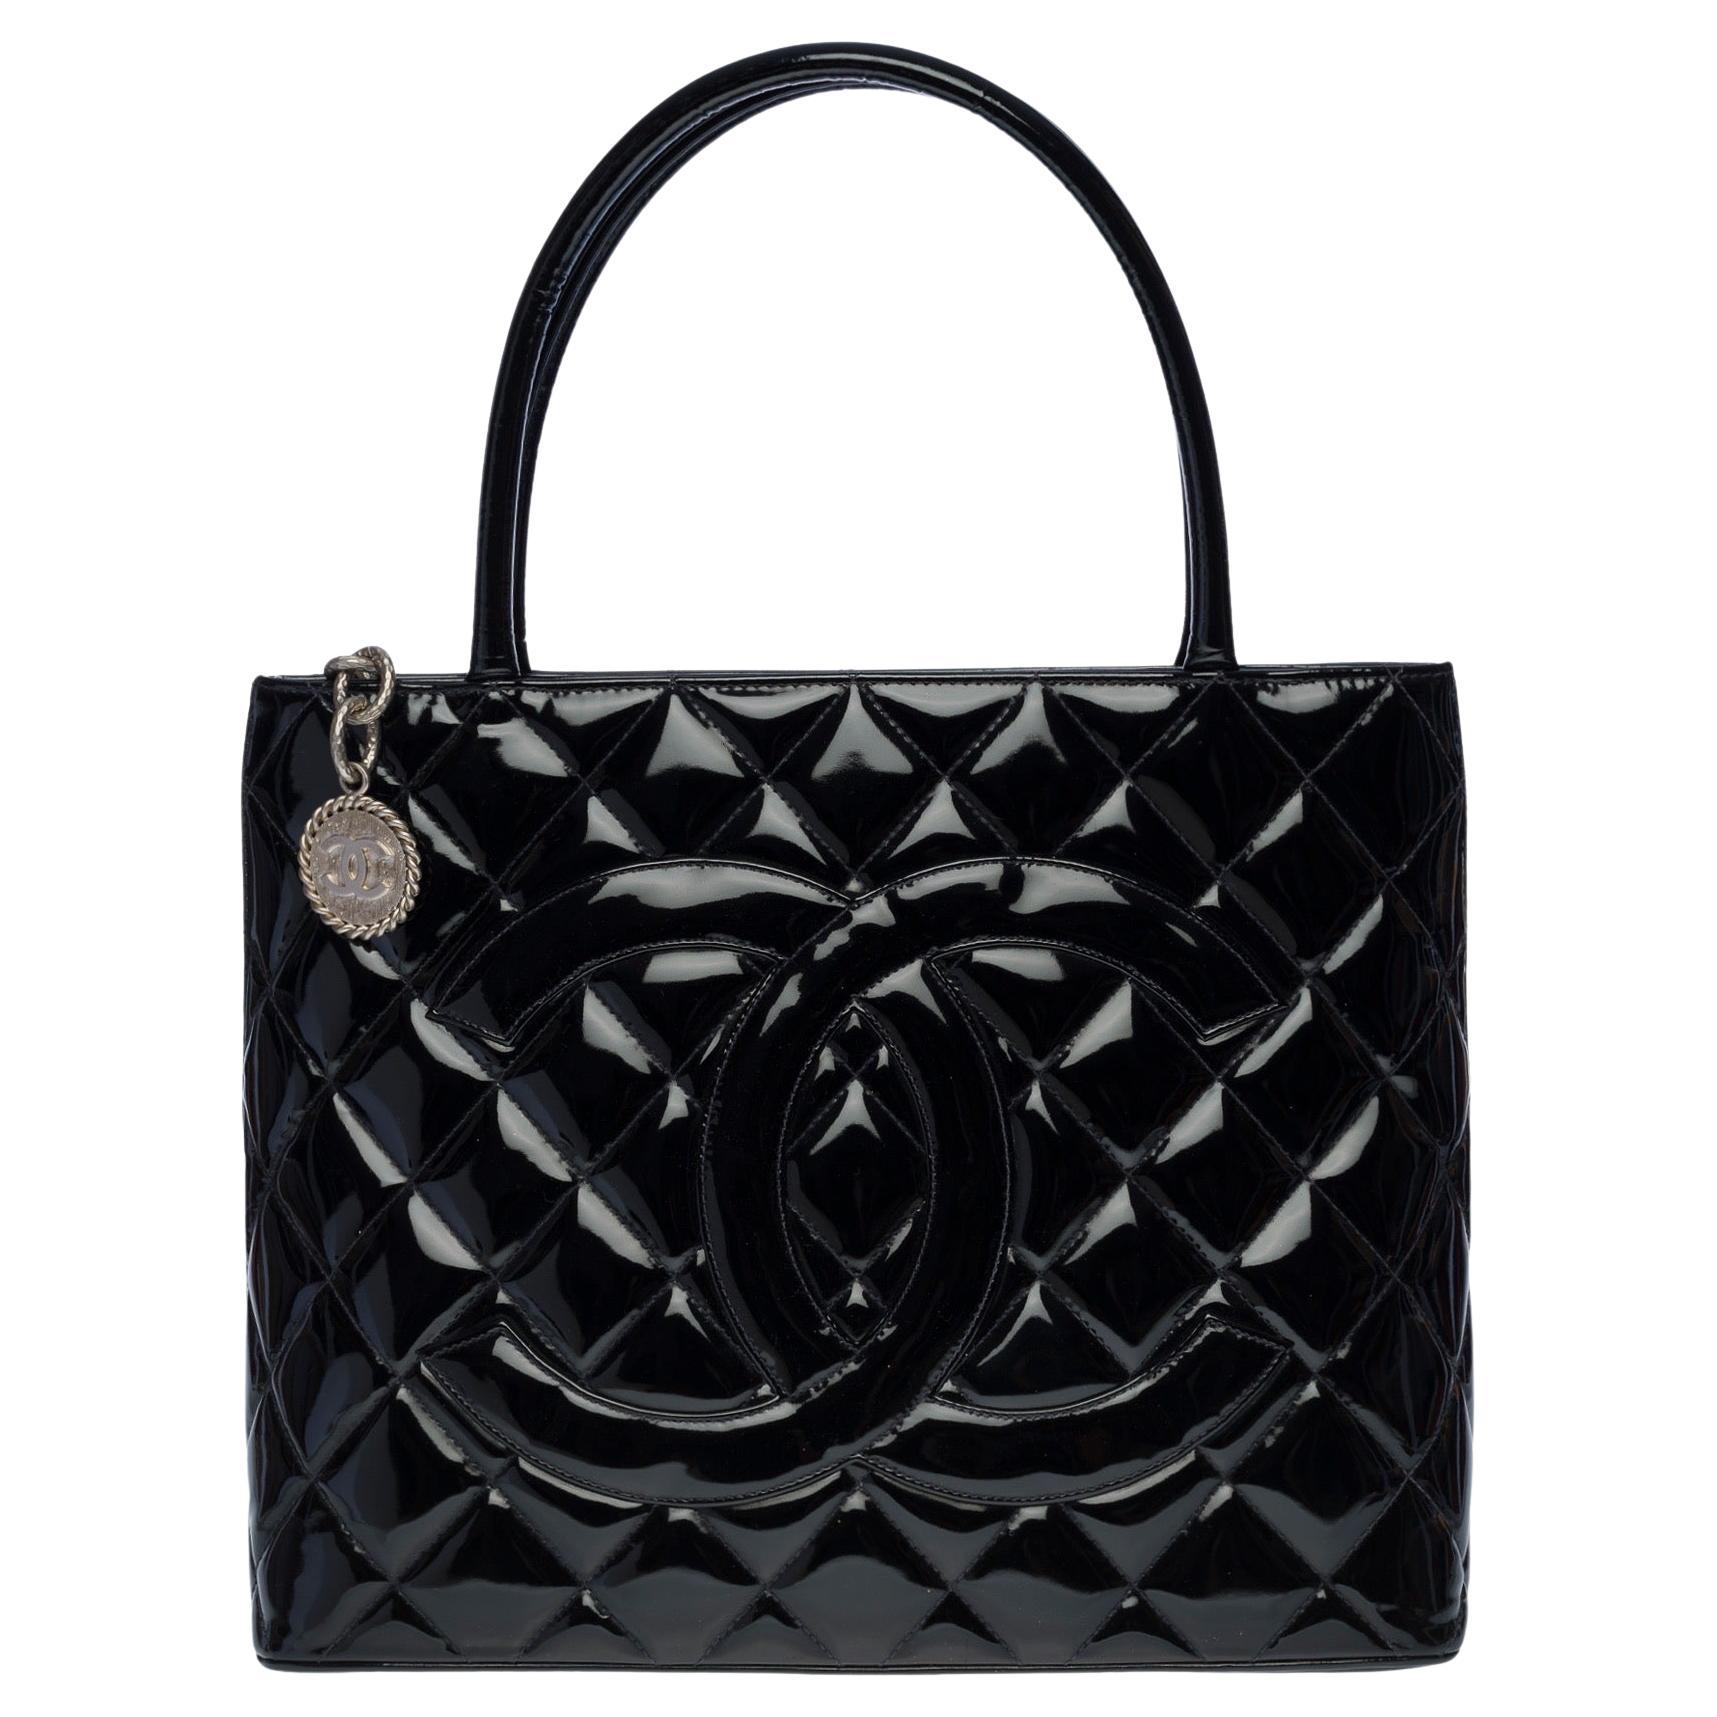 Beautiful Chanel Cabas Medallion bag in black patent leather, SHW For Sale